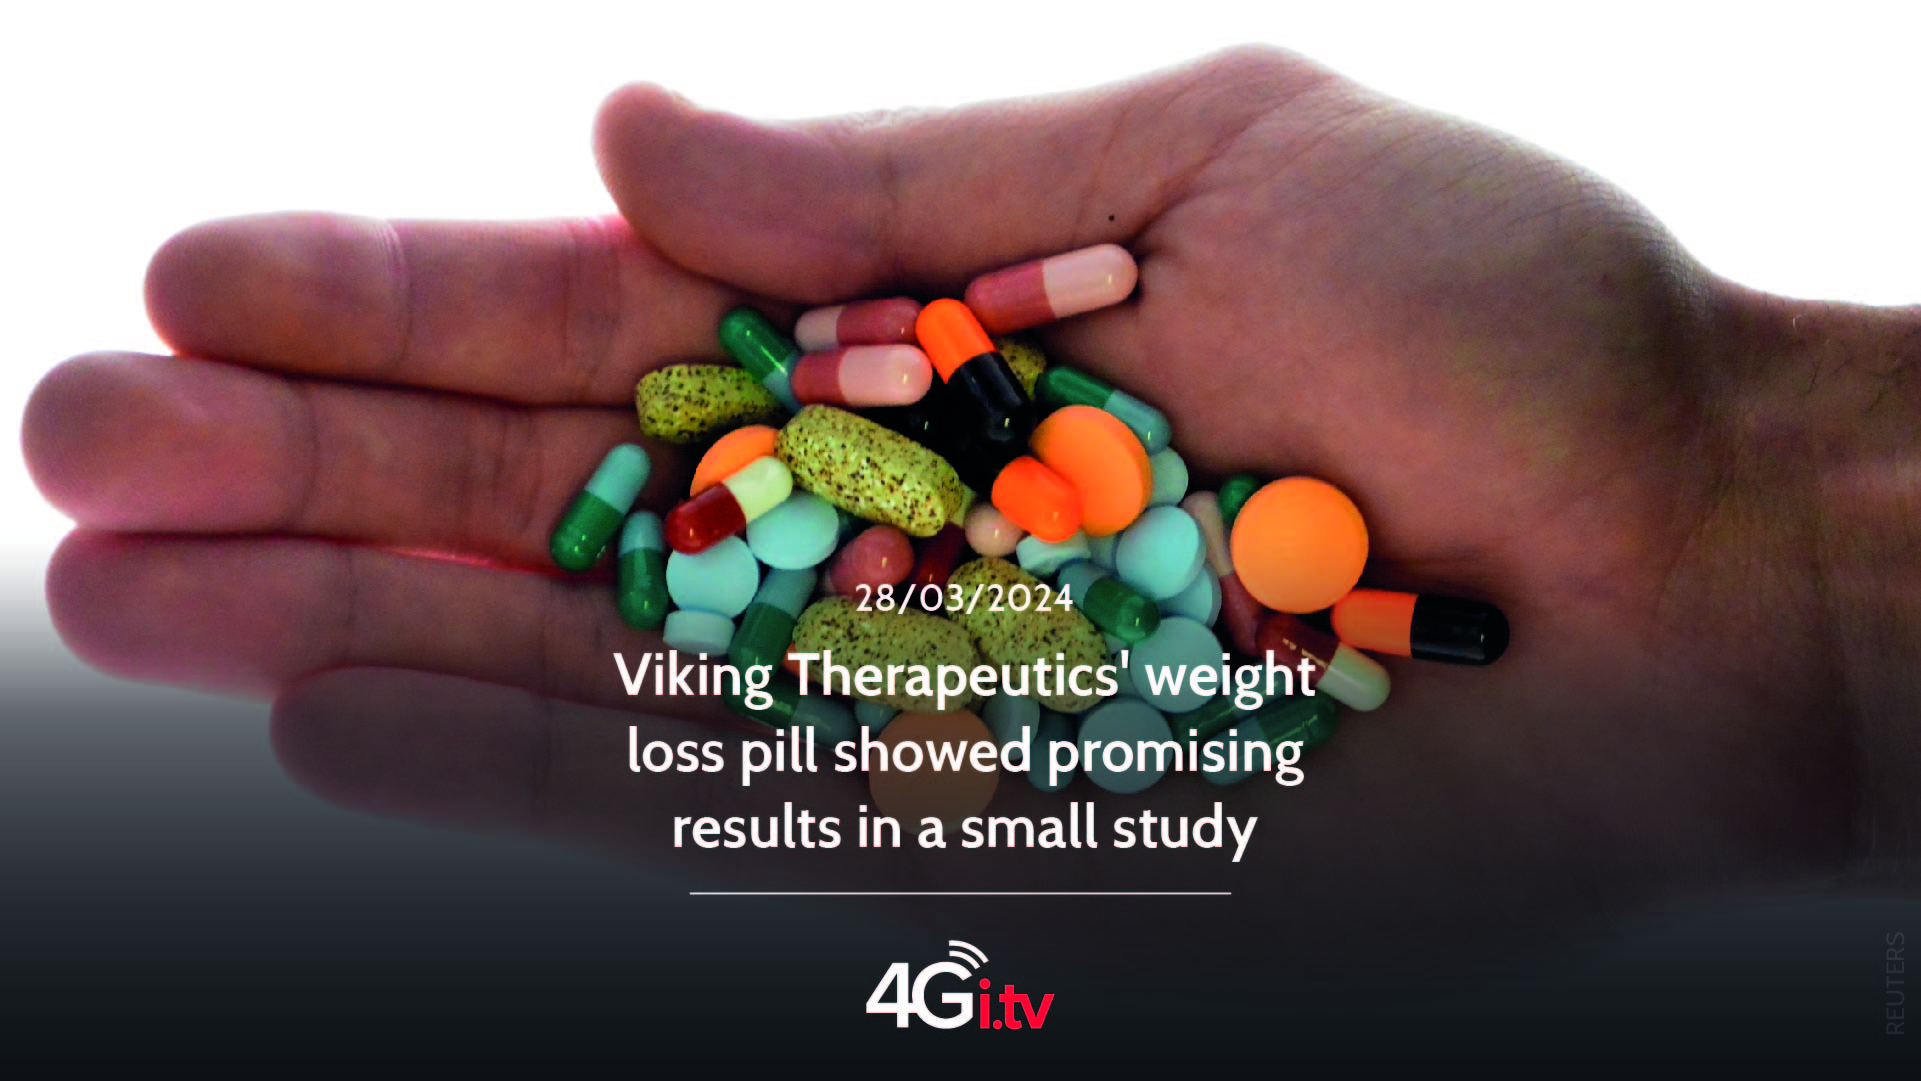 Lee más sobre el artículo Viking Therapeutics’ weight loss pill showed promising results in a small study